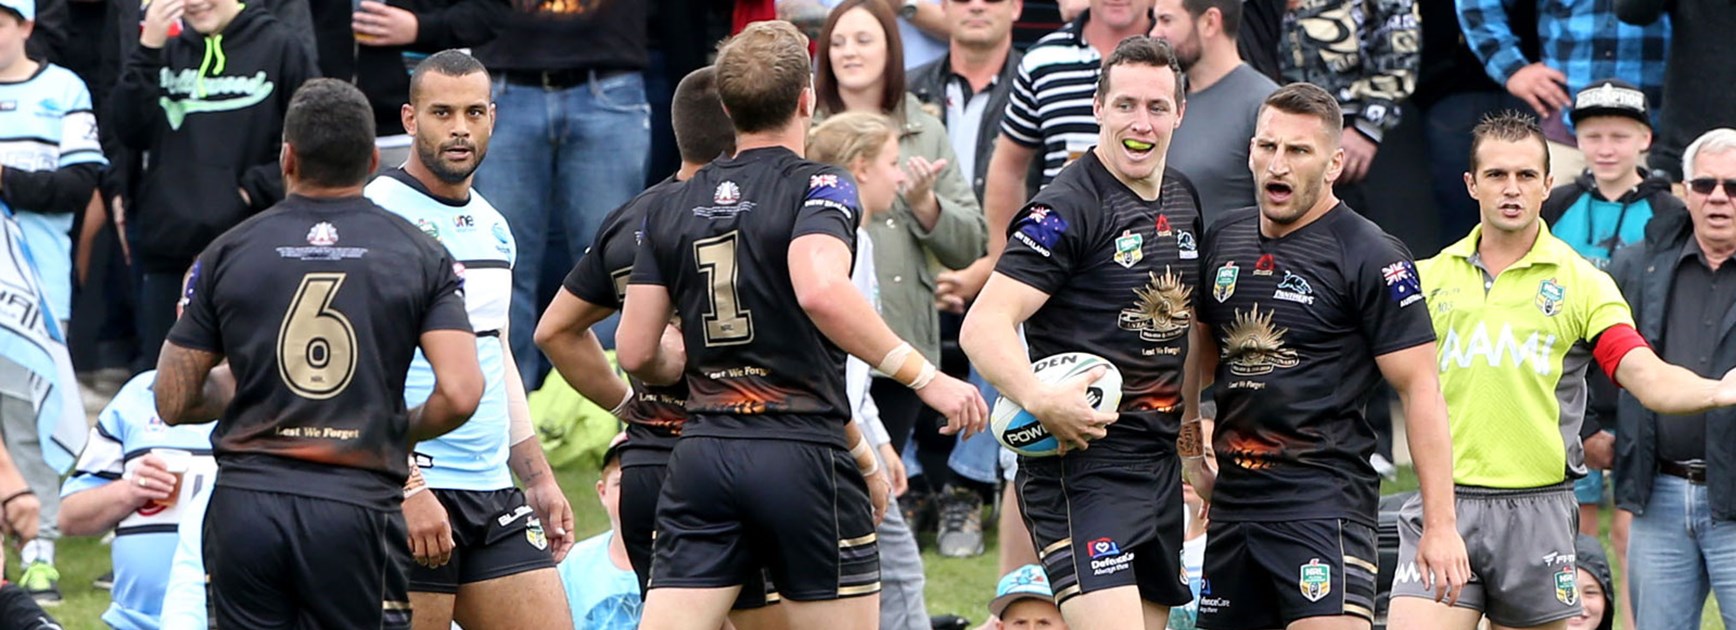 Penrith players celebrate during their Round 8 win over the Sharks at Pepper Stadium.